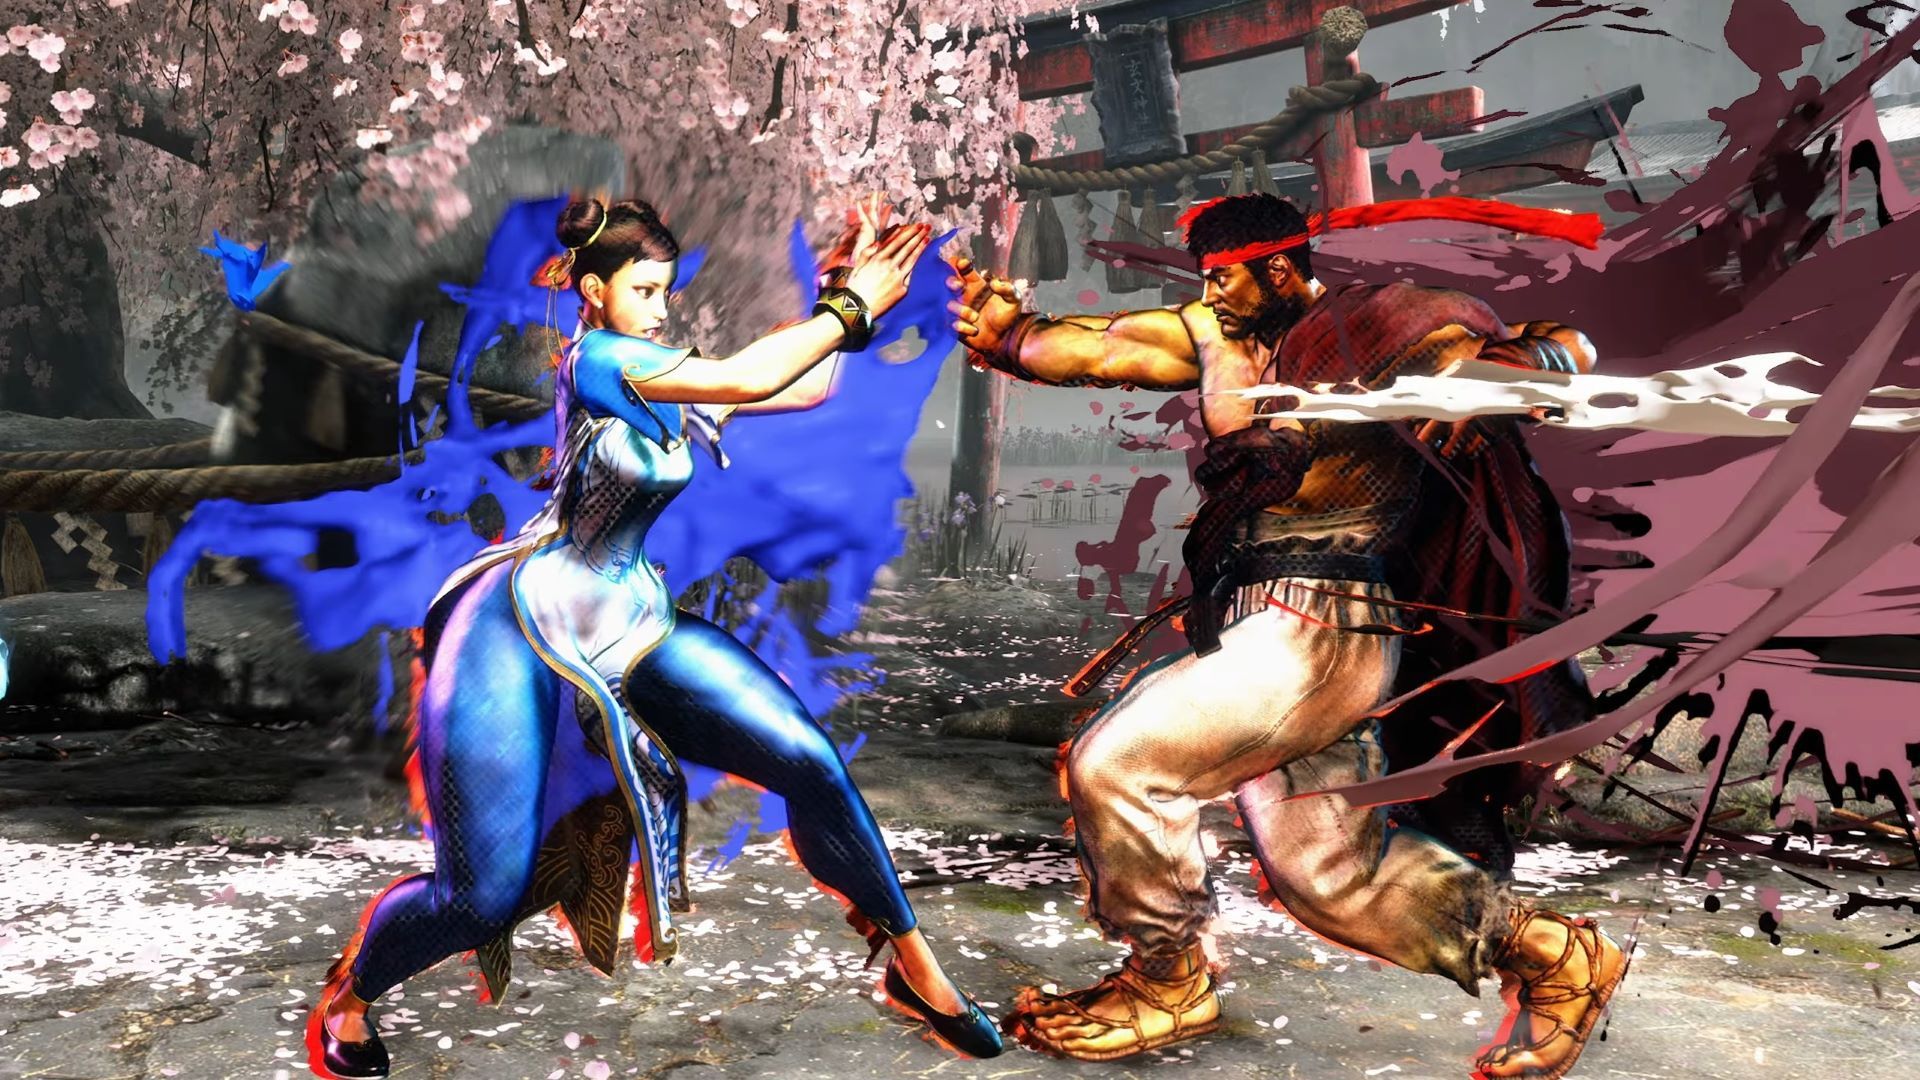 Fighting games Street Fighter 4 players should try while waiting